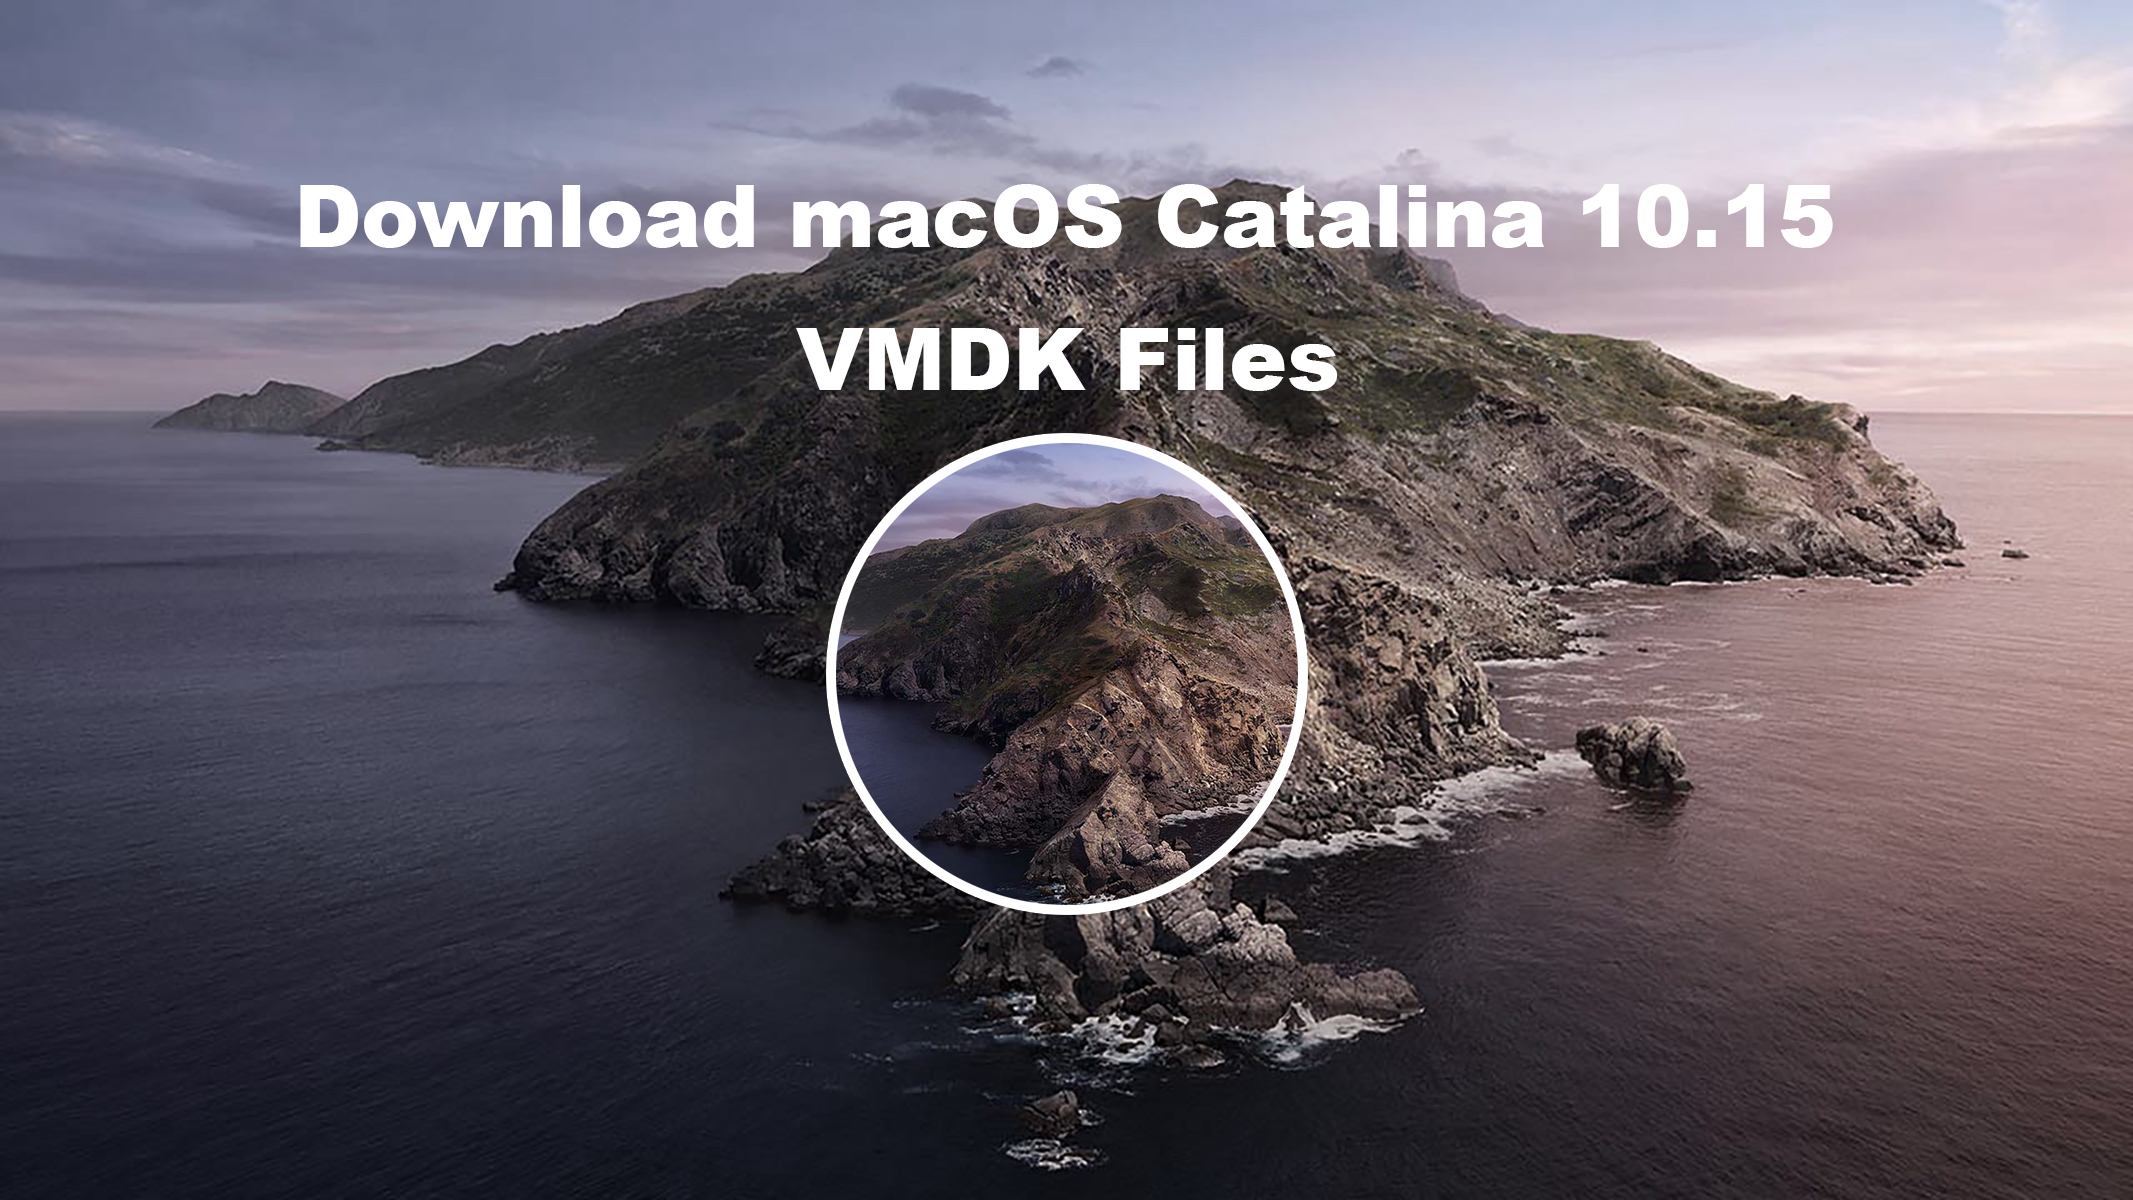 upgrade from mac os sierra to catalina